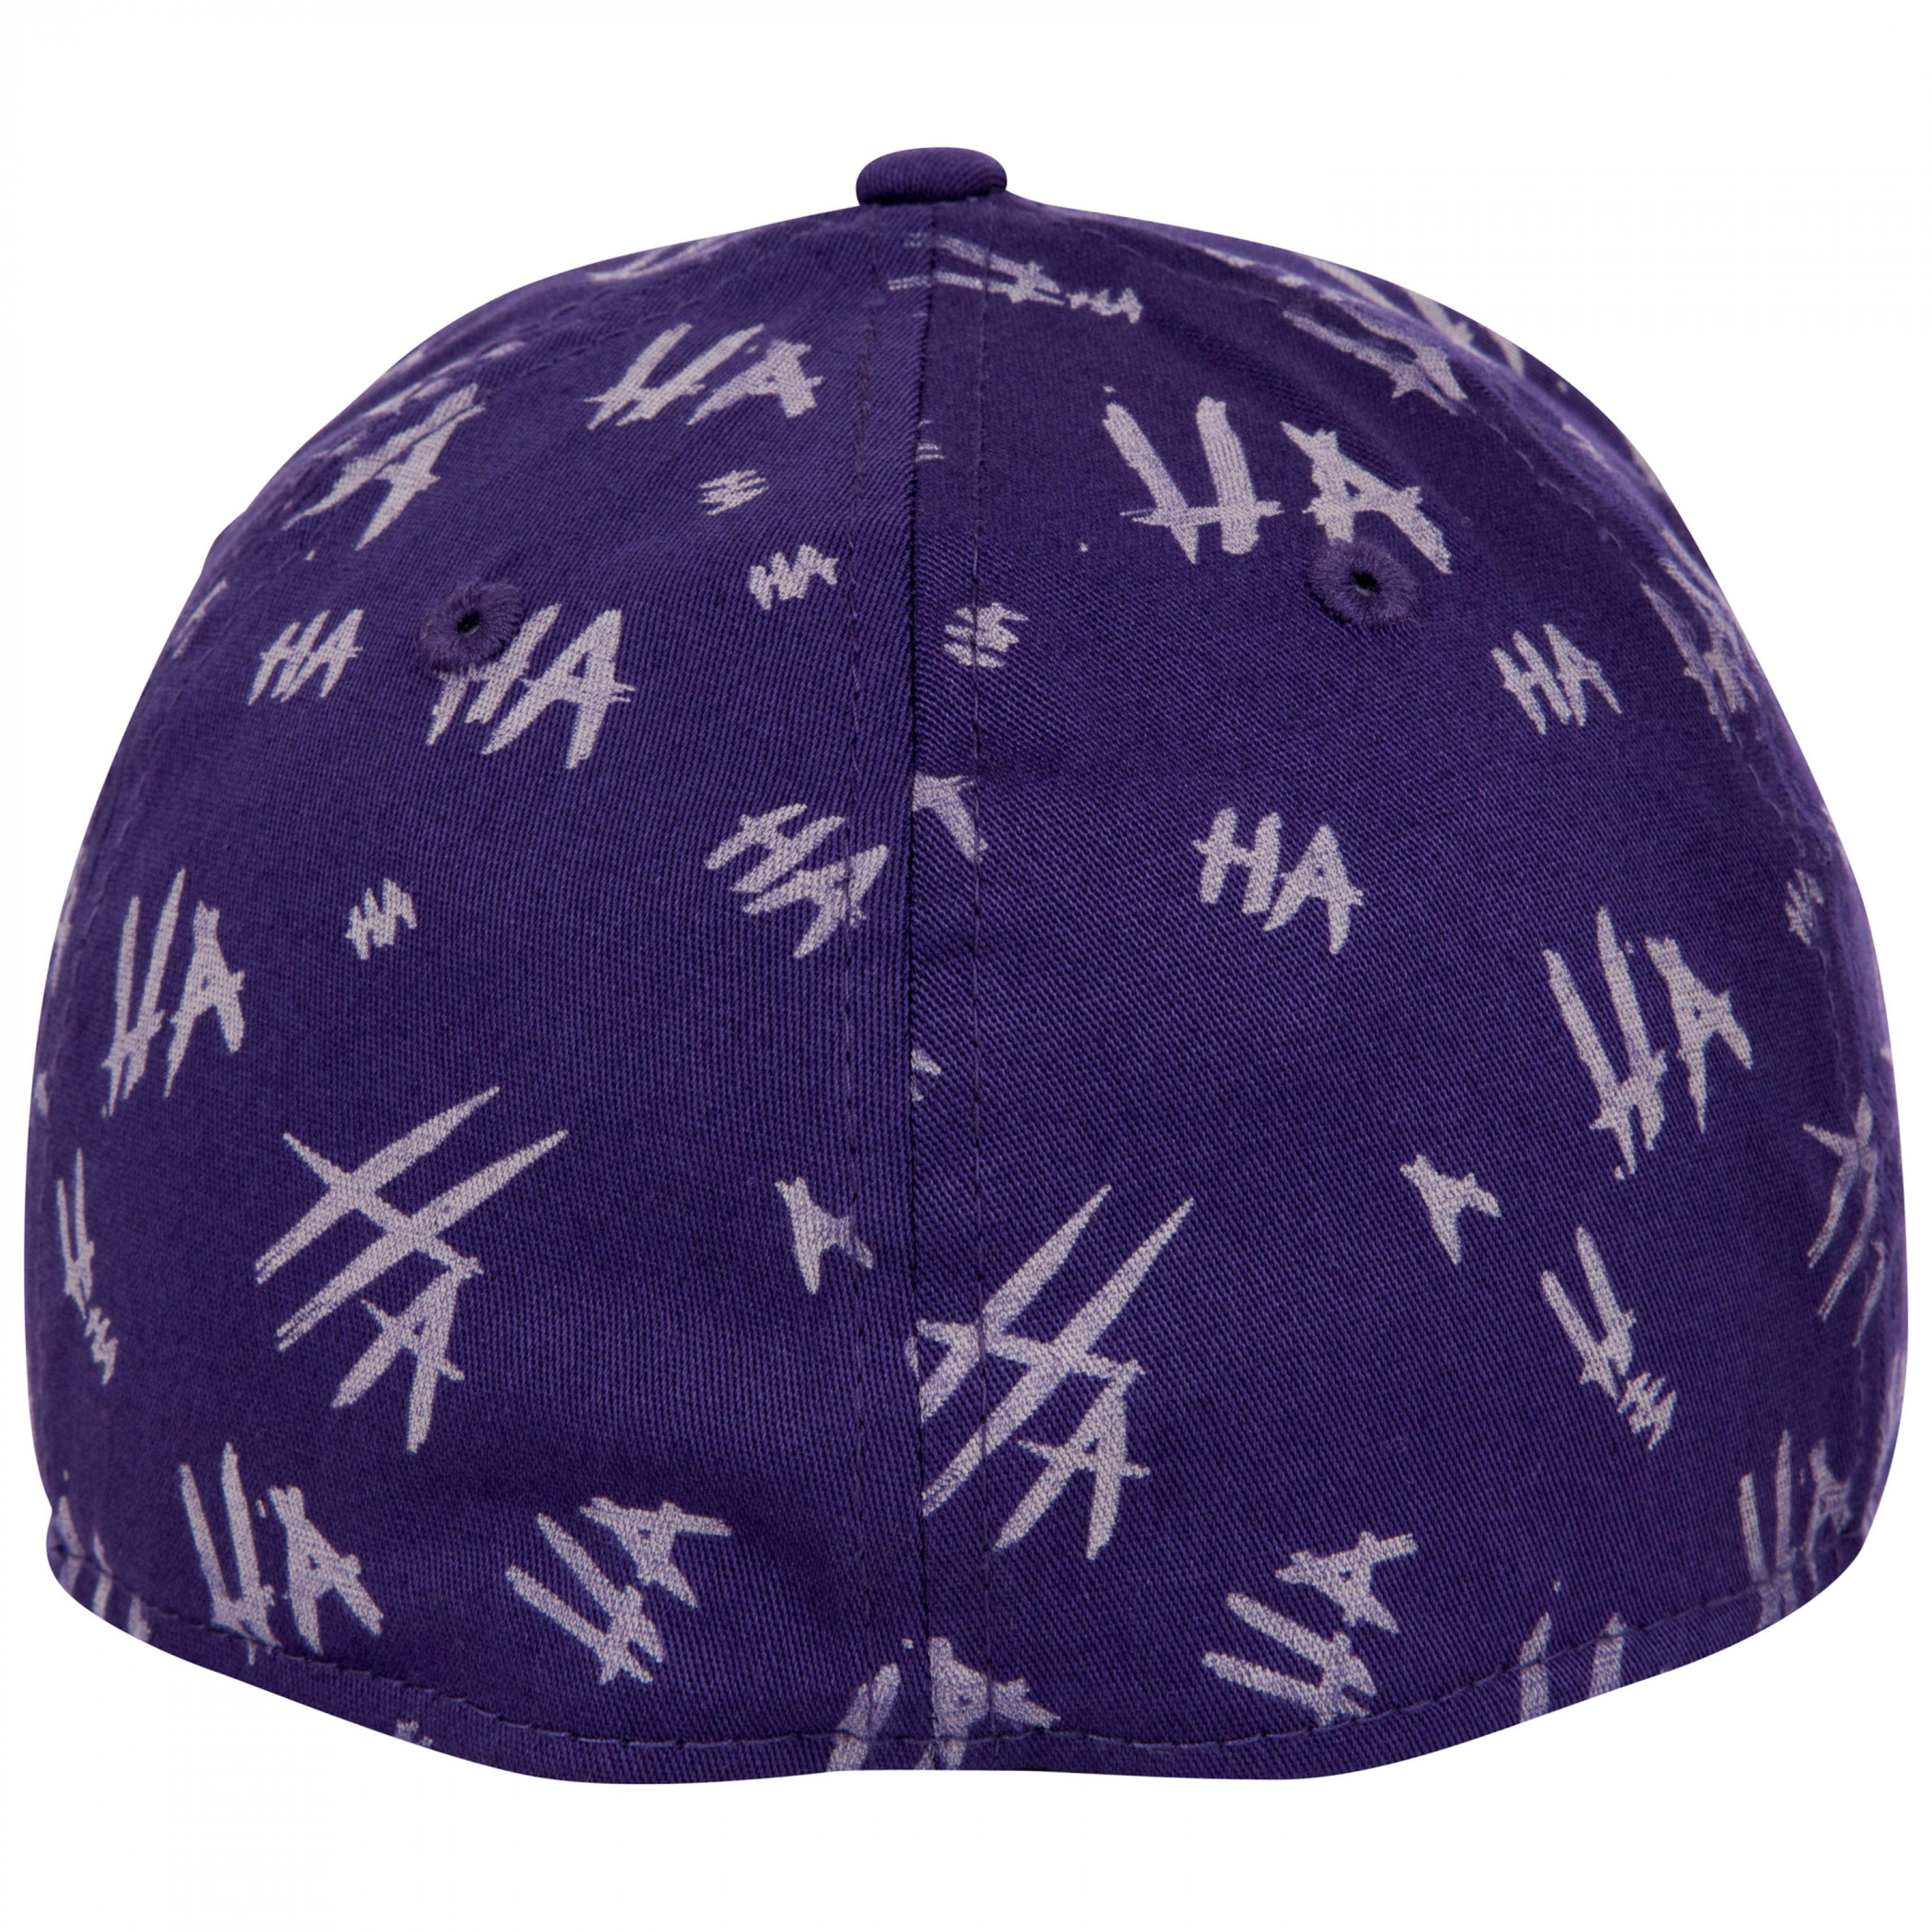 Joker Purple All Over HAHA 39Thirty Fitted New Era Hat